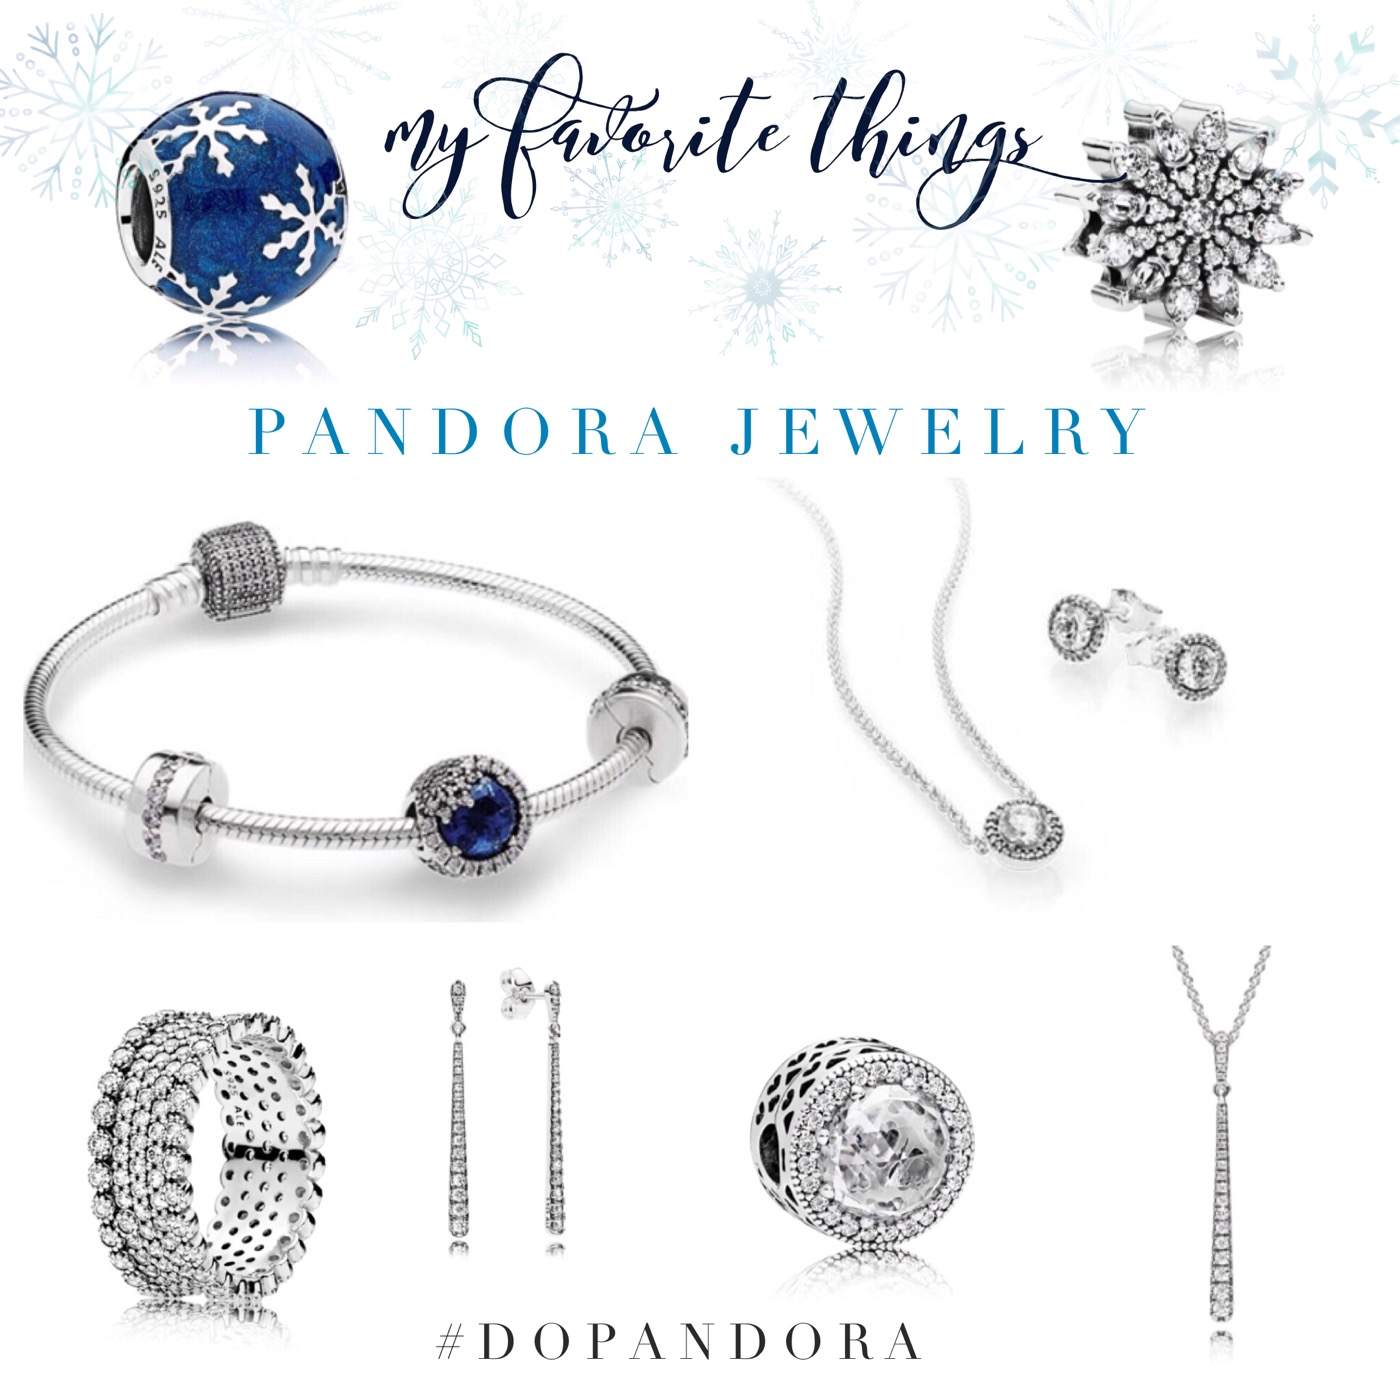 Pandora Jewelry - My Favorite Gifts for Her to give this holiday season plus a peek at my photo shoot with PANDORA via Misty Nelson @frostedevents frostedblog.com